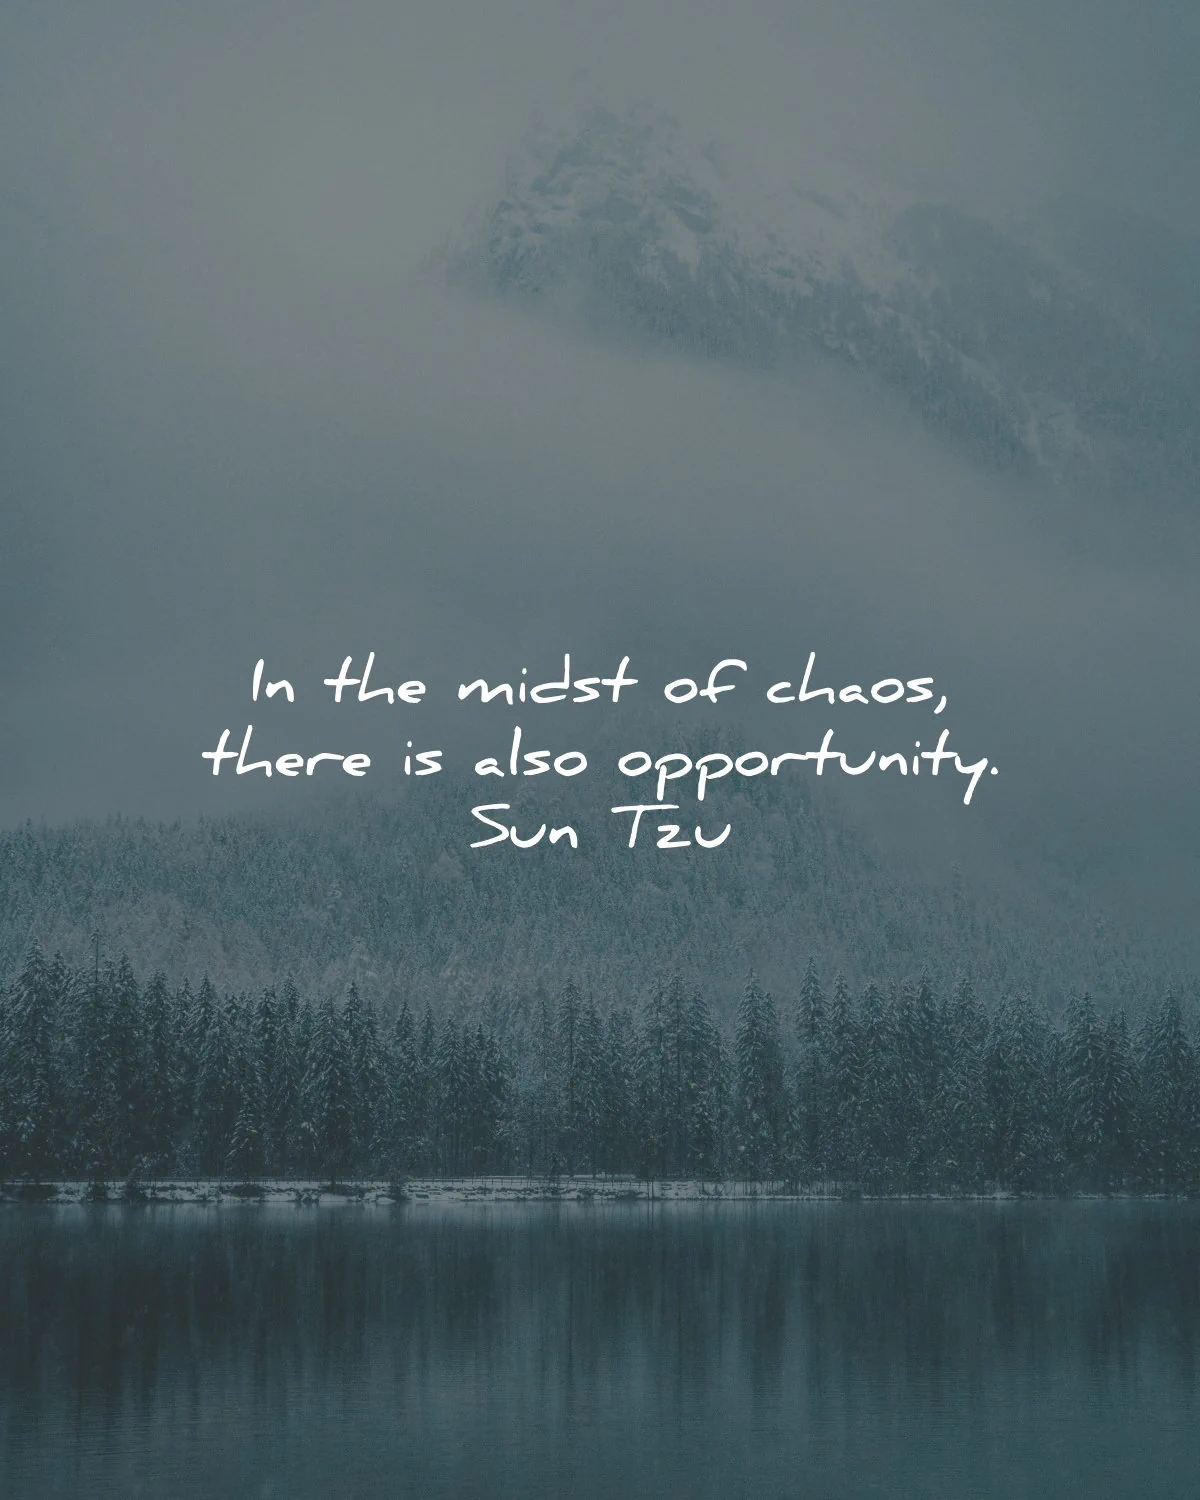 sun tzu quotes midst chaos also opportunity wisdom